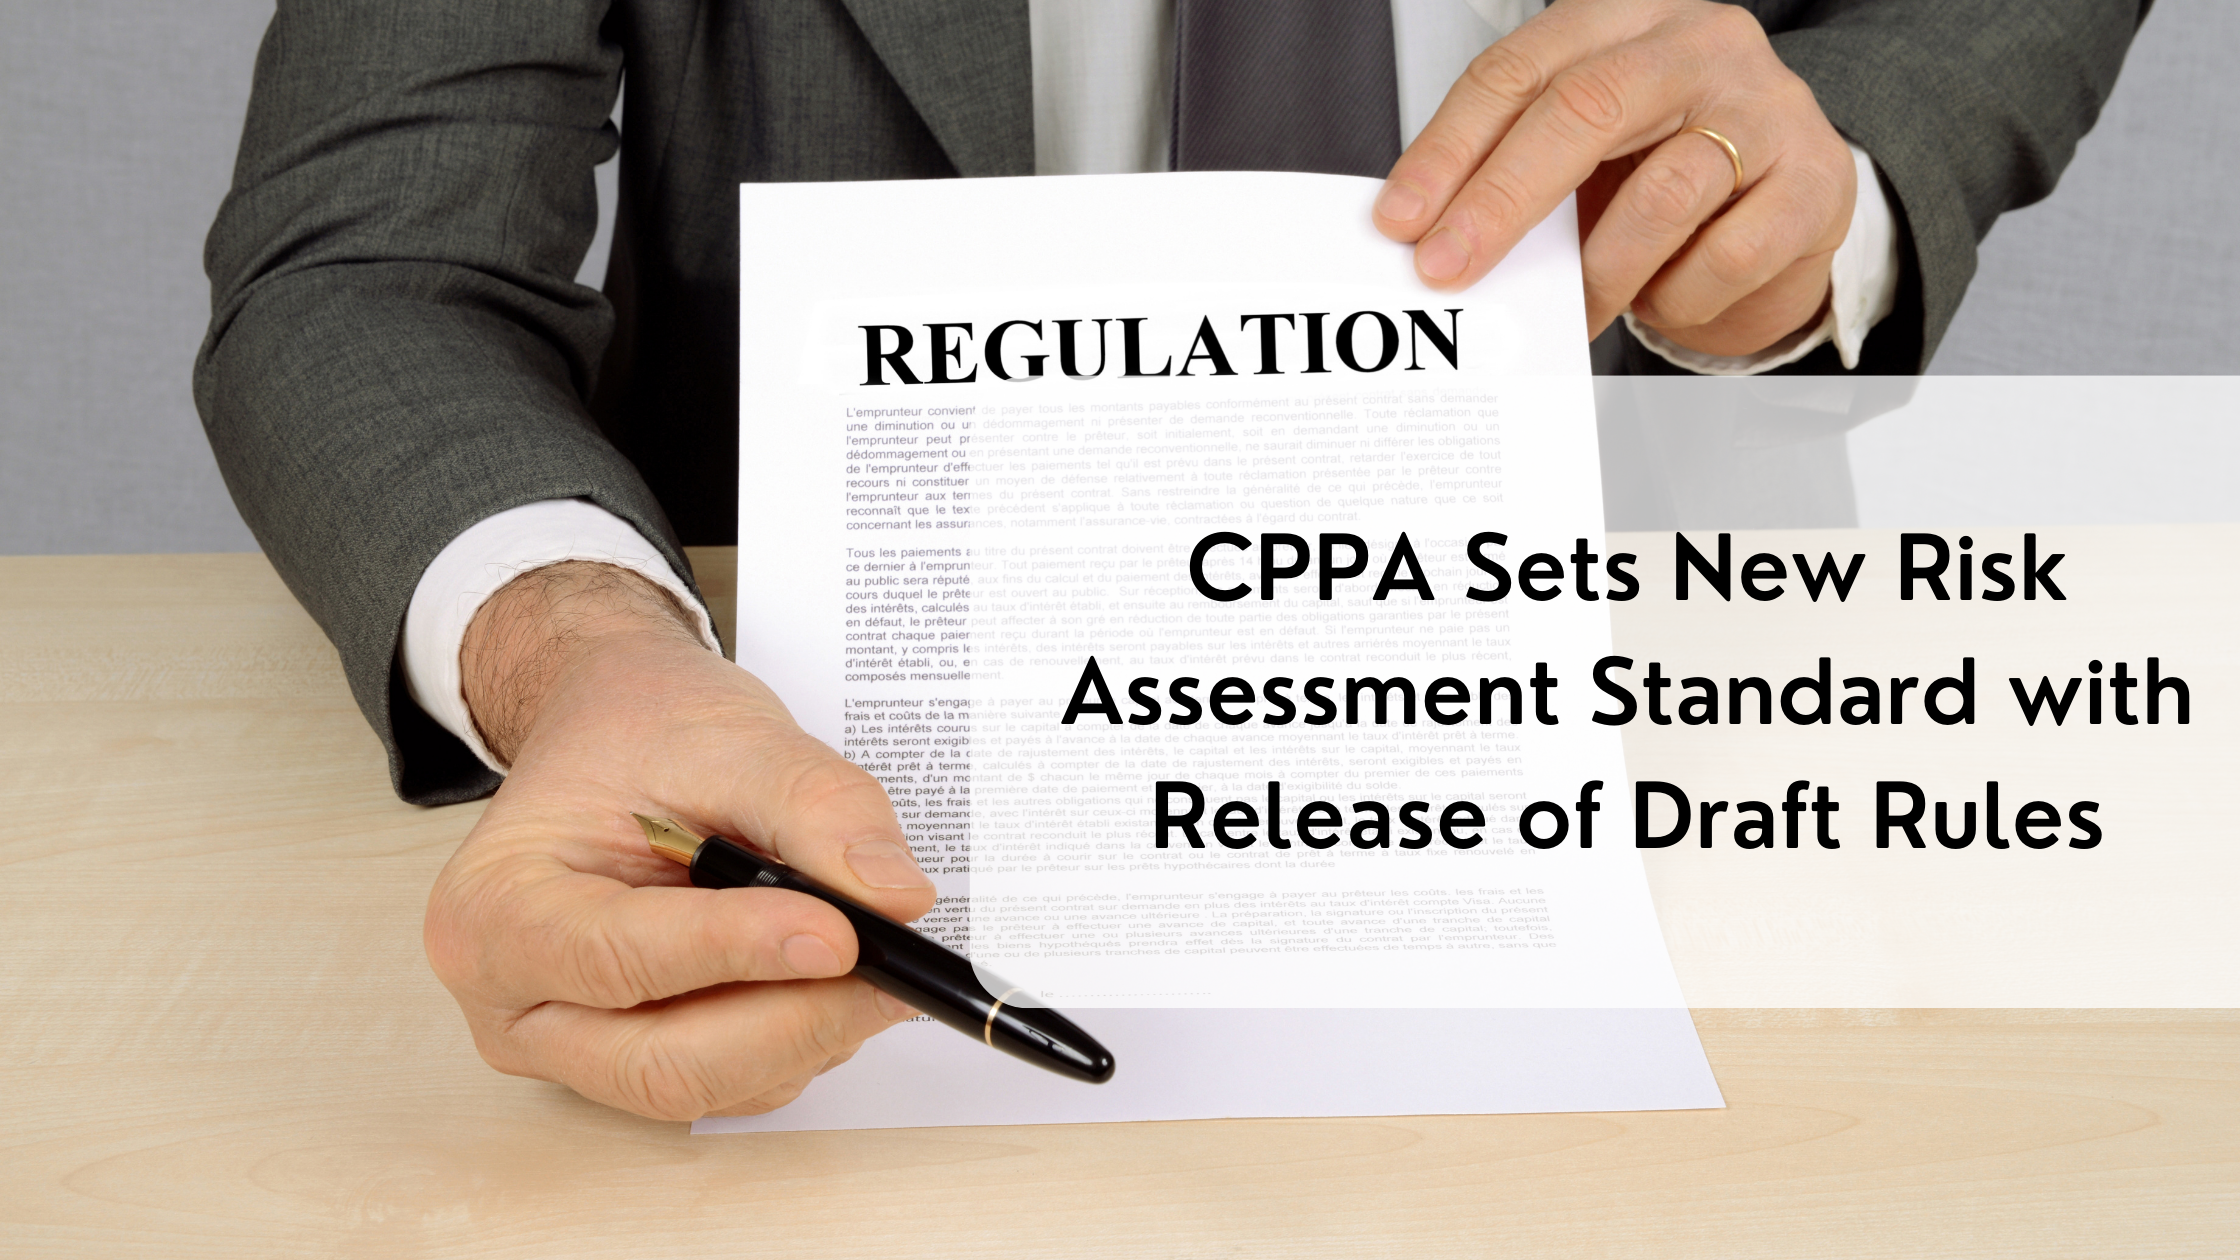 CPPA Sets New Risk Assessment Standard with Release of Draft Rules